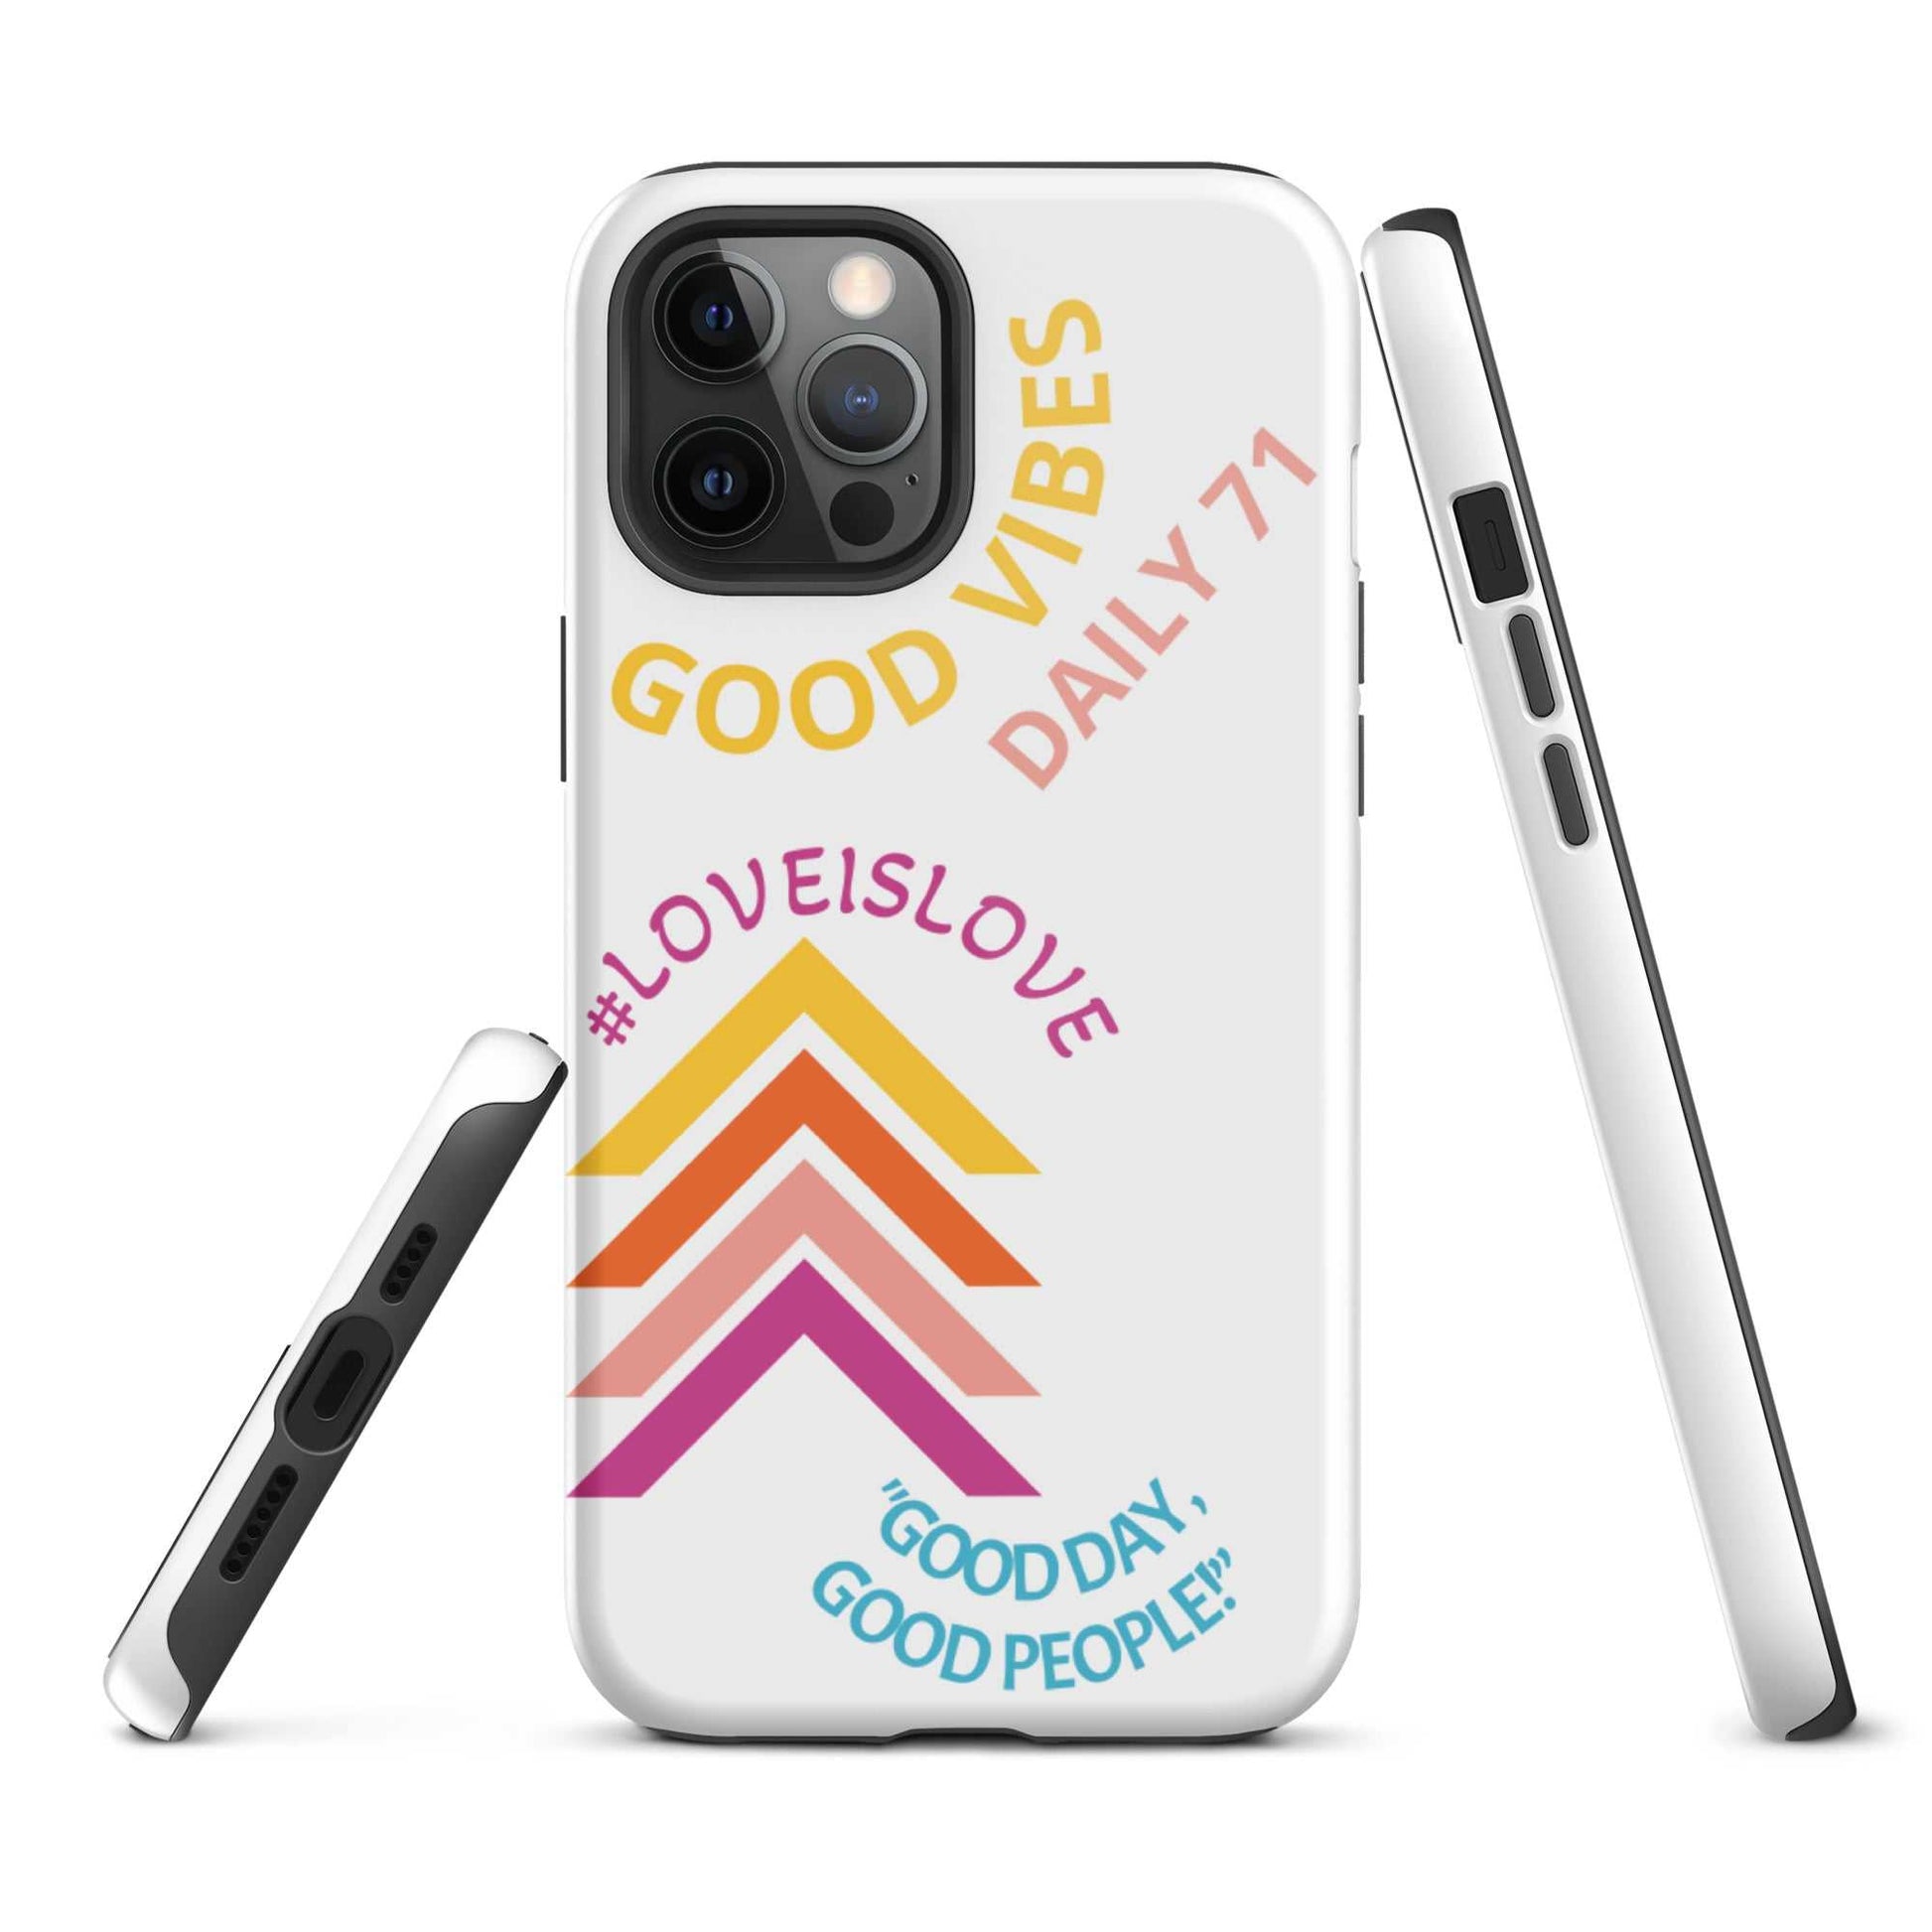 Good Vibes Tough iPhone case Motivation on the Go!! Phone Case Good Vibes Daily Lab 28